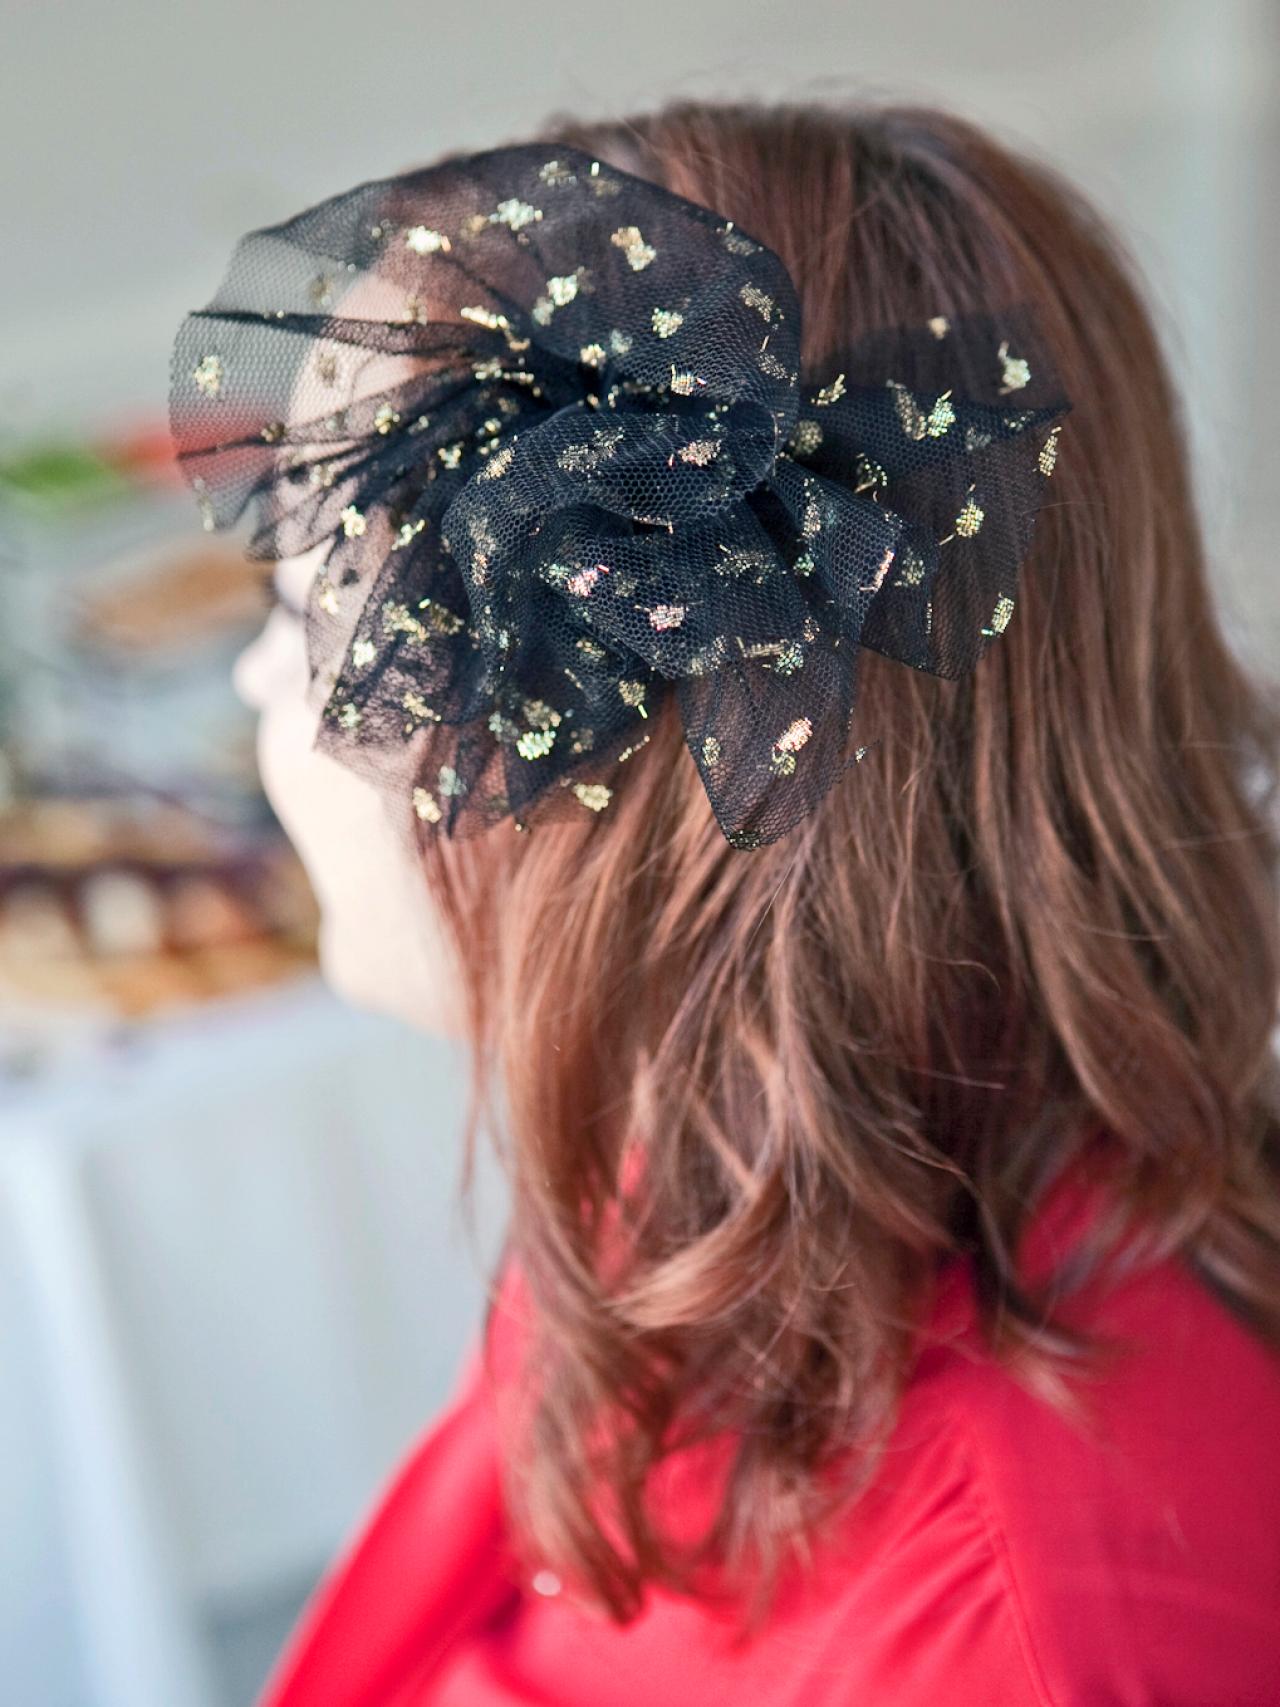 How to Make a Vintage-Inspired Tulle Hair Comb | HGTV